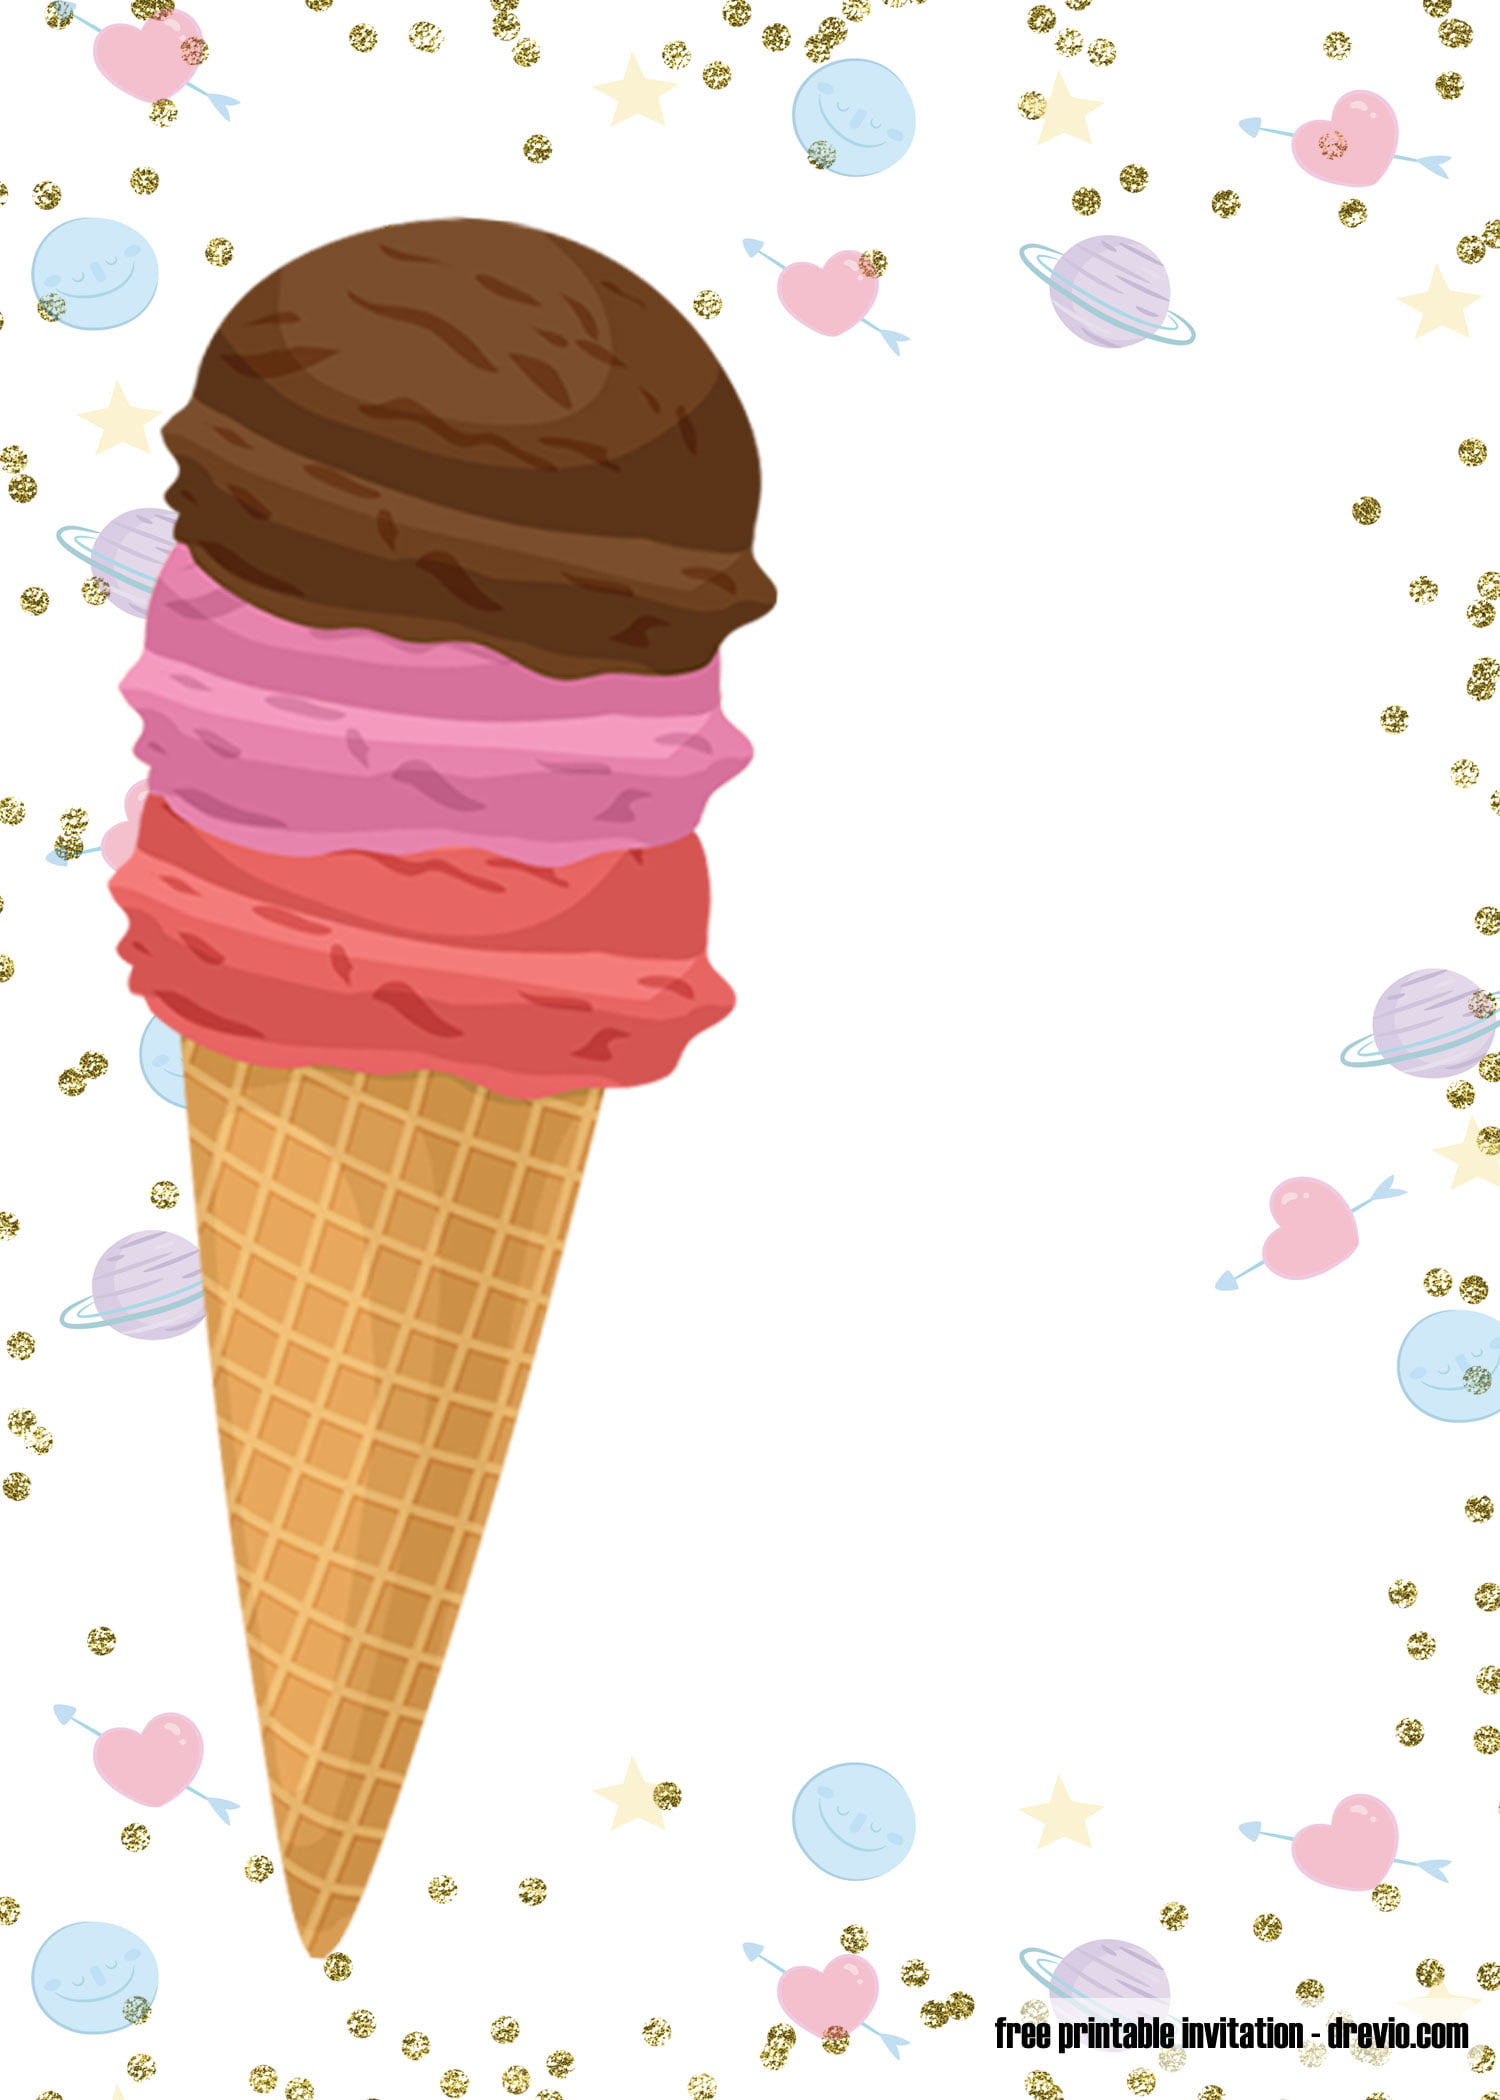 july-17th-is-national-ice-cream-day-here-s-a-printable-coupon-to-share